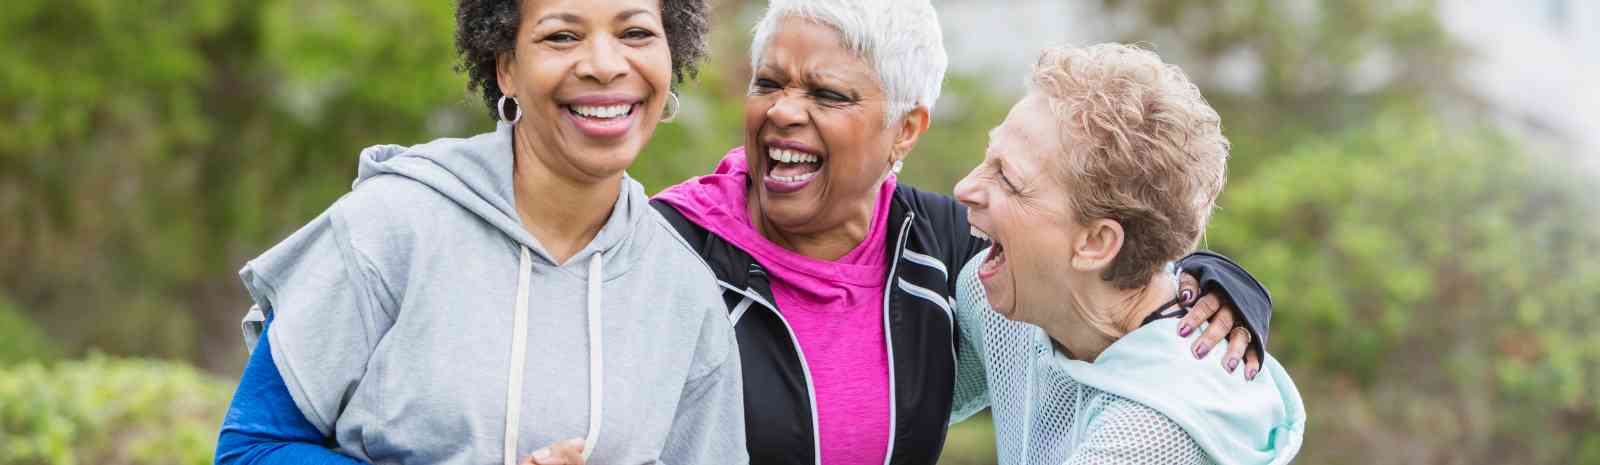 Three mature women laughing in a park.